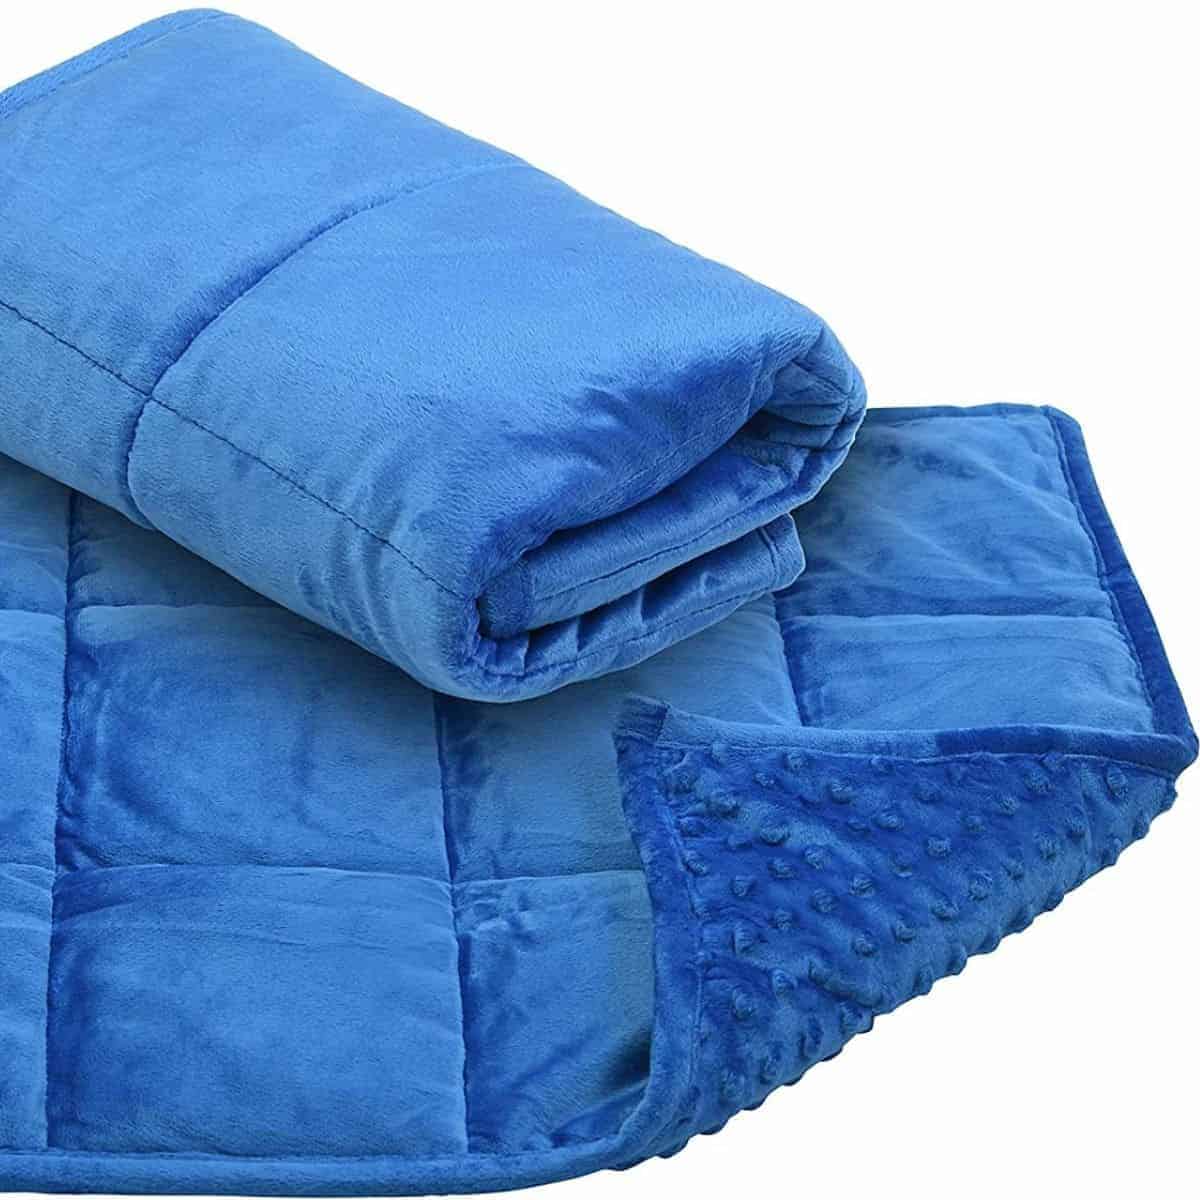 Weighted Lap Pad For Kids Work Car Adults Lap Blanket For School 3 lbs 